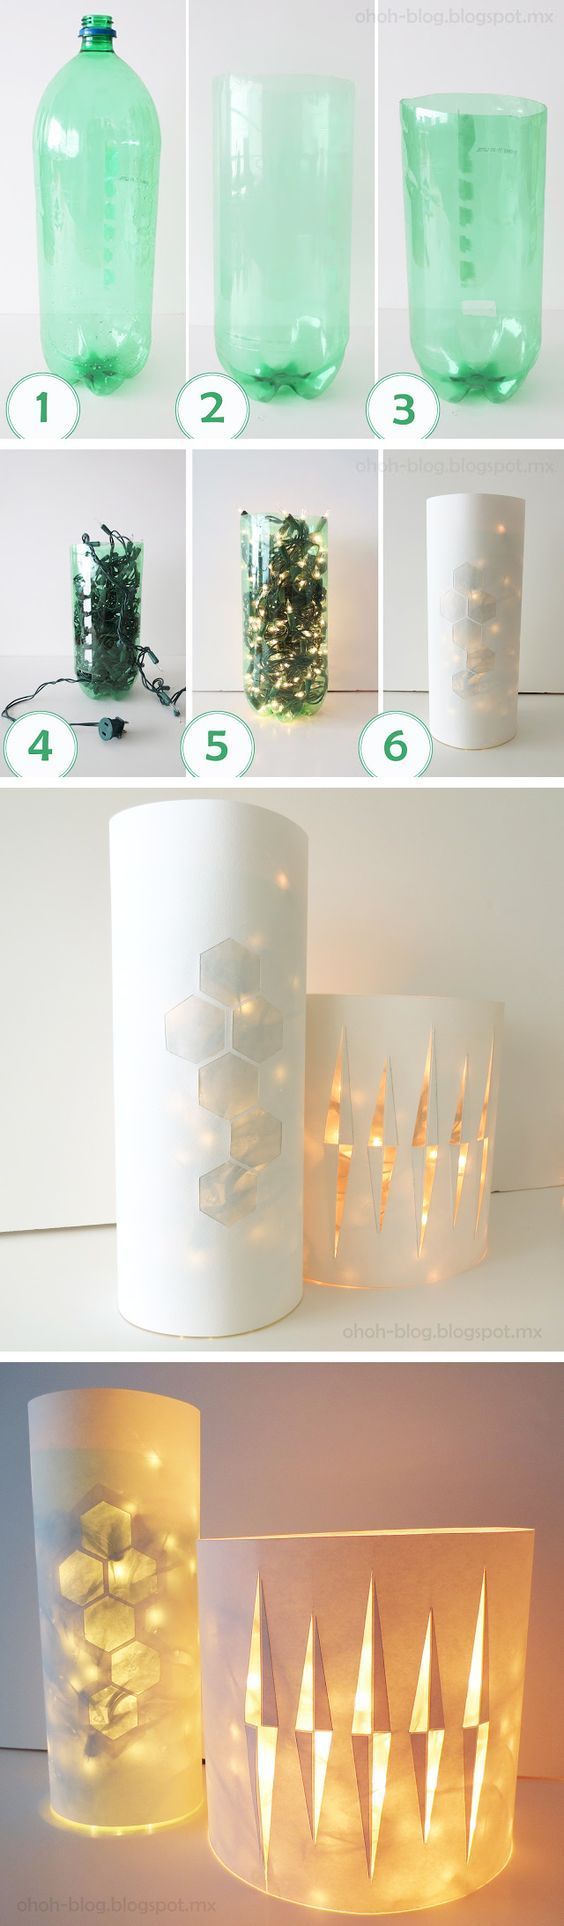 20 Creative Ways To Recycle Plastic Bottles Into Useful Things